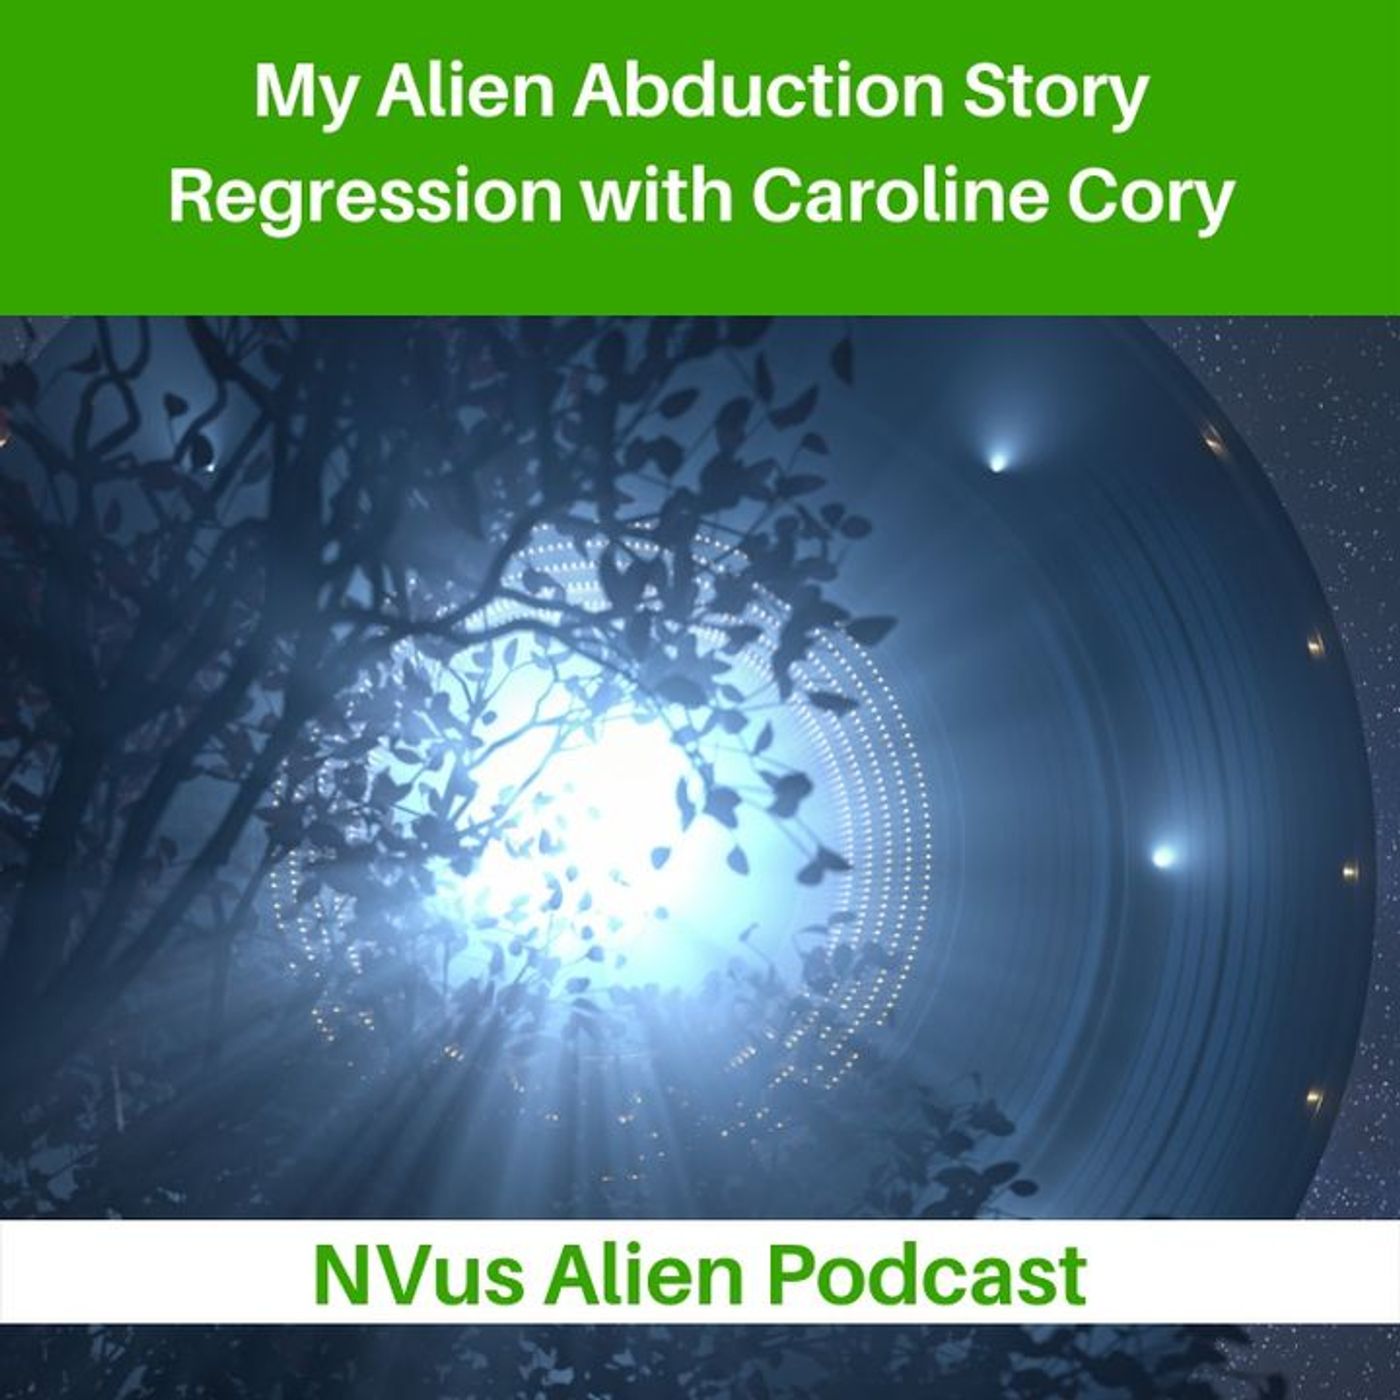 REPOST: My Alien Abduction Story 🛸Regression with Caroline Cory